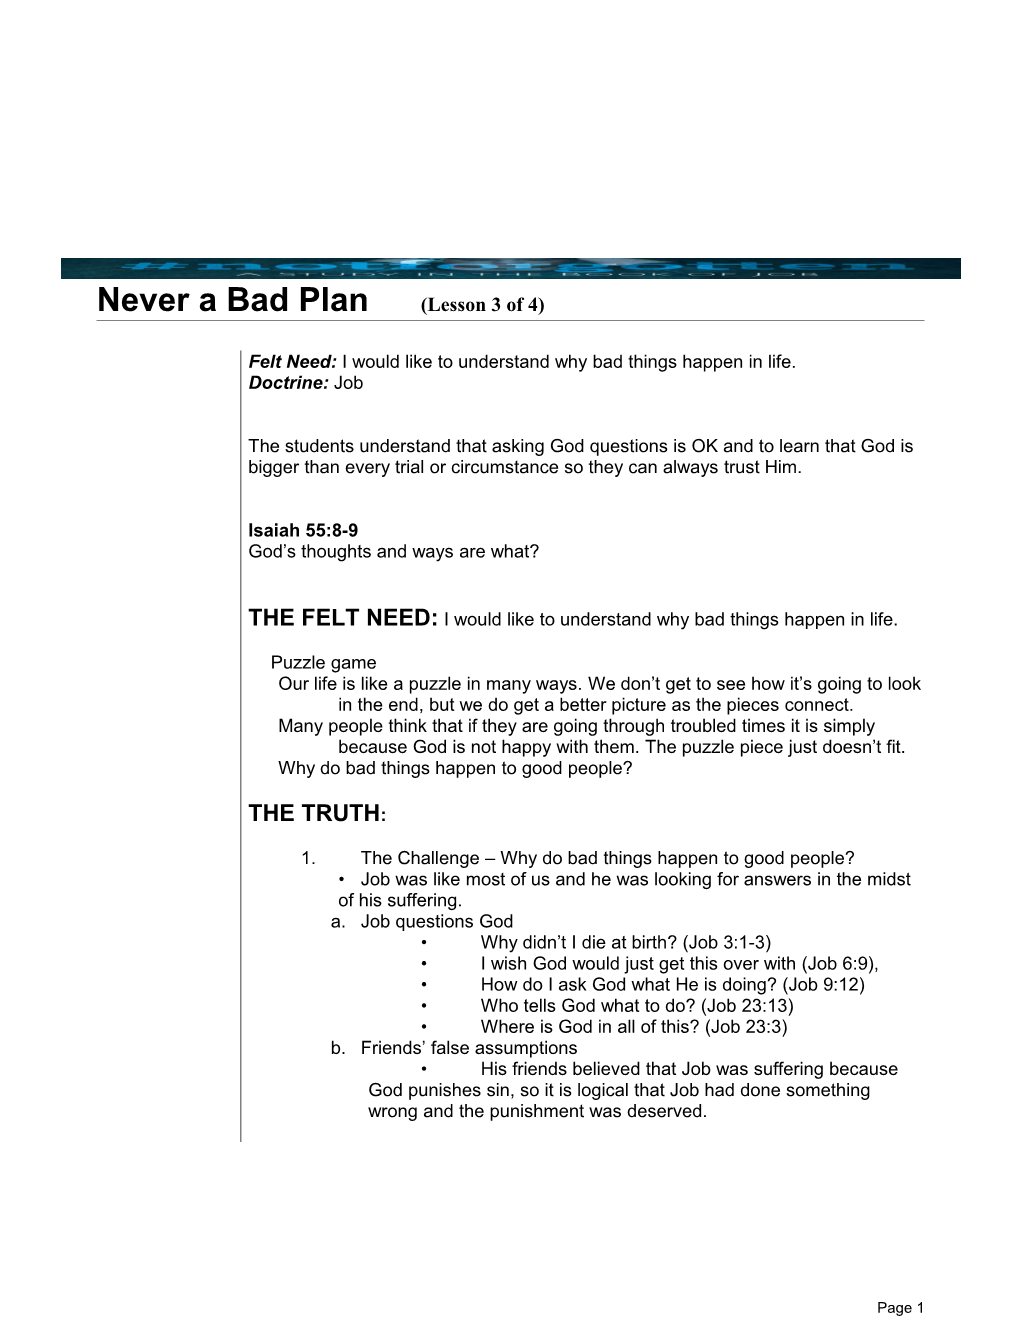 Never a Bad Plan(Lesson 3 of 4)